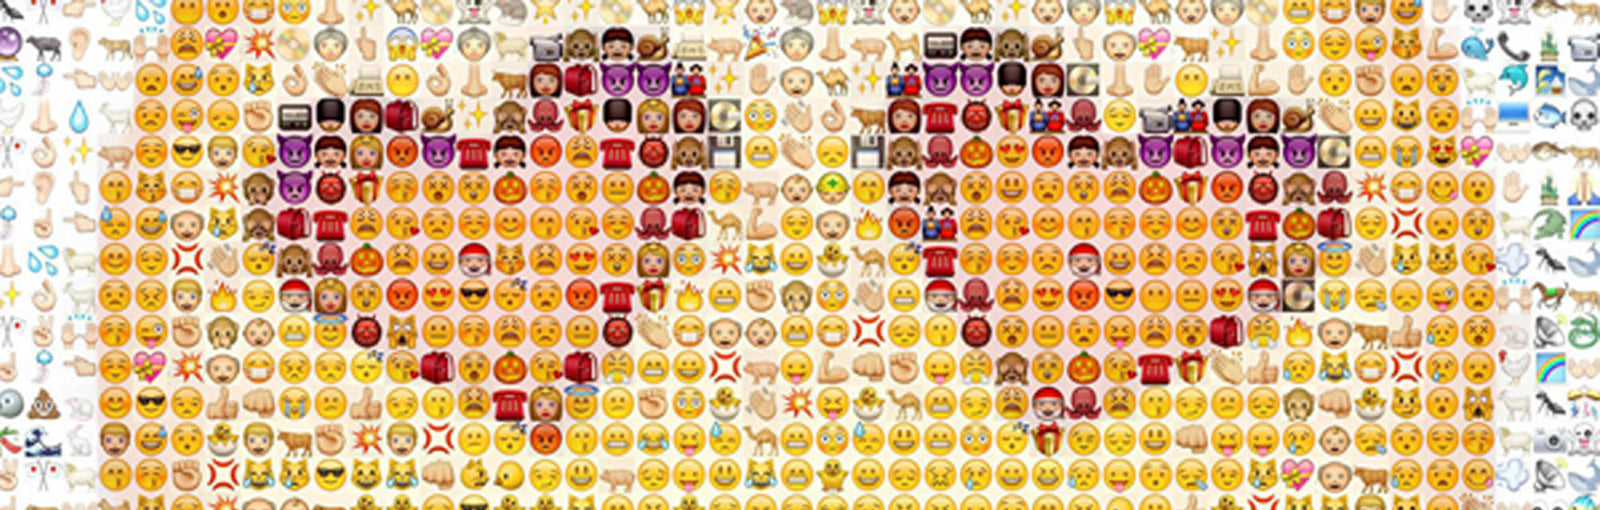 THE RISE OF THE EMOJI